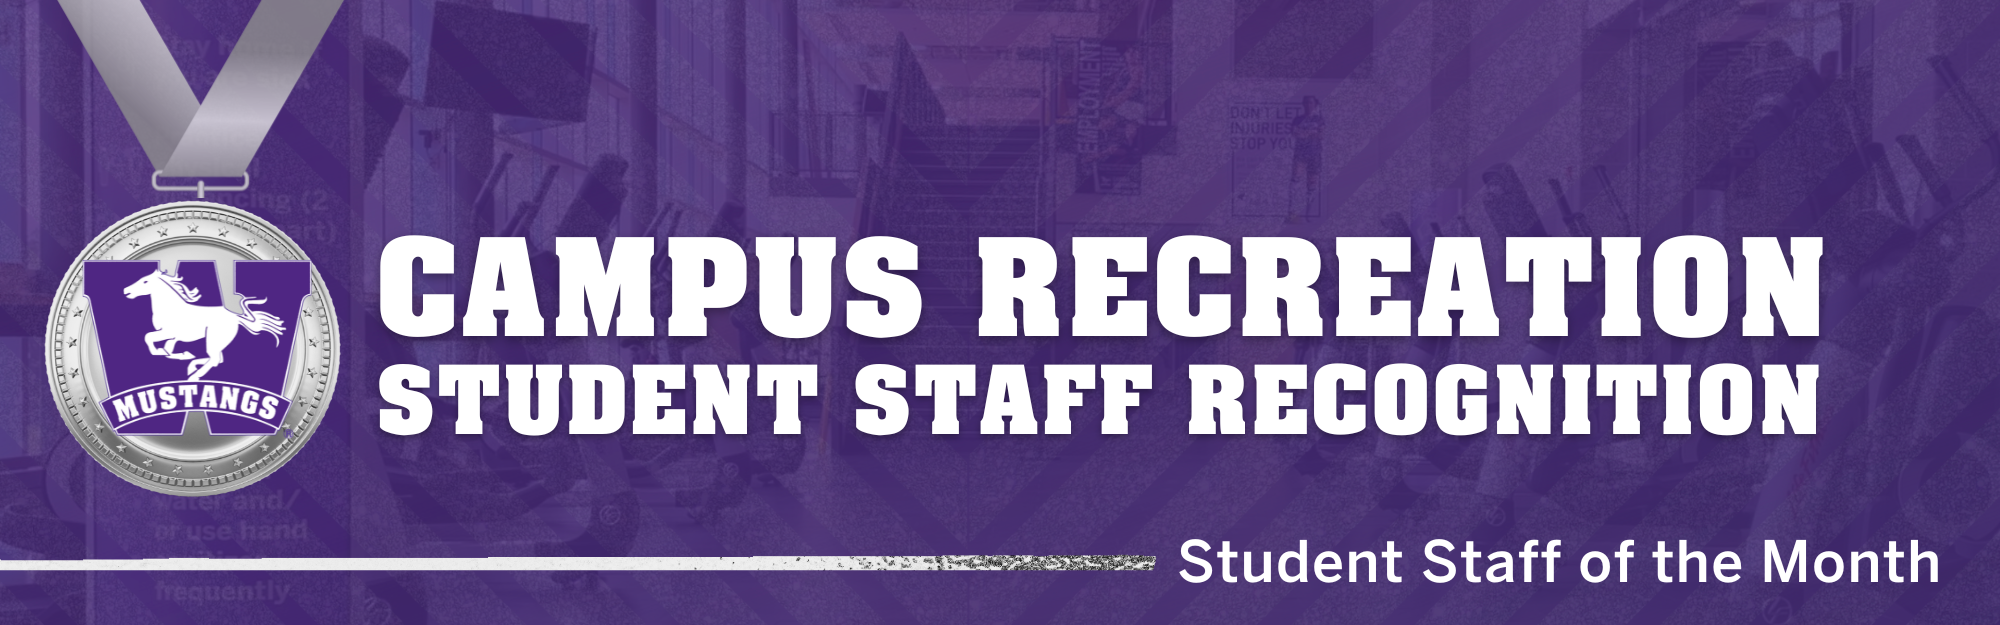 Student Staff Recognition Banner, with design that looks like an medal 